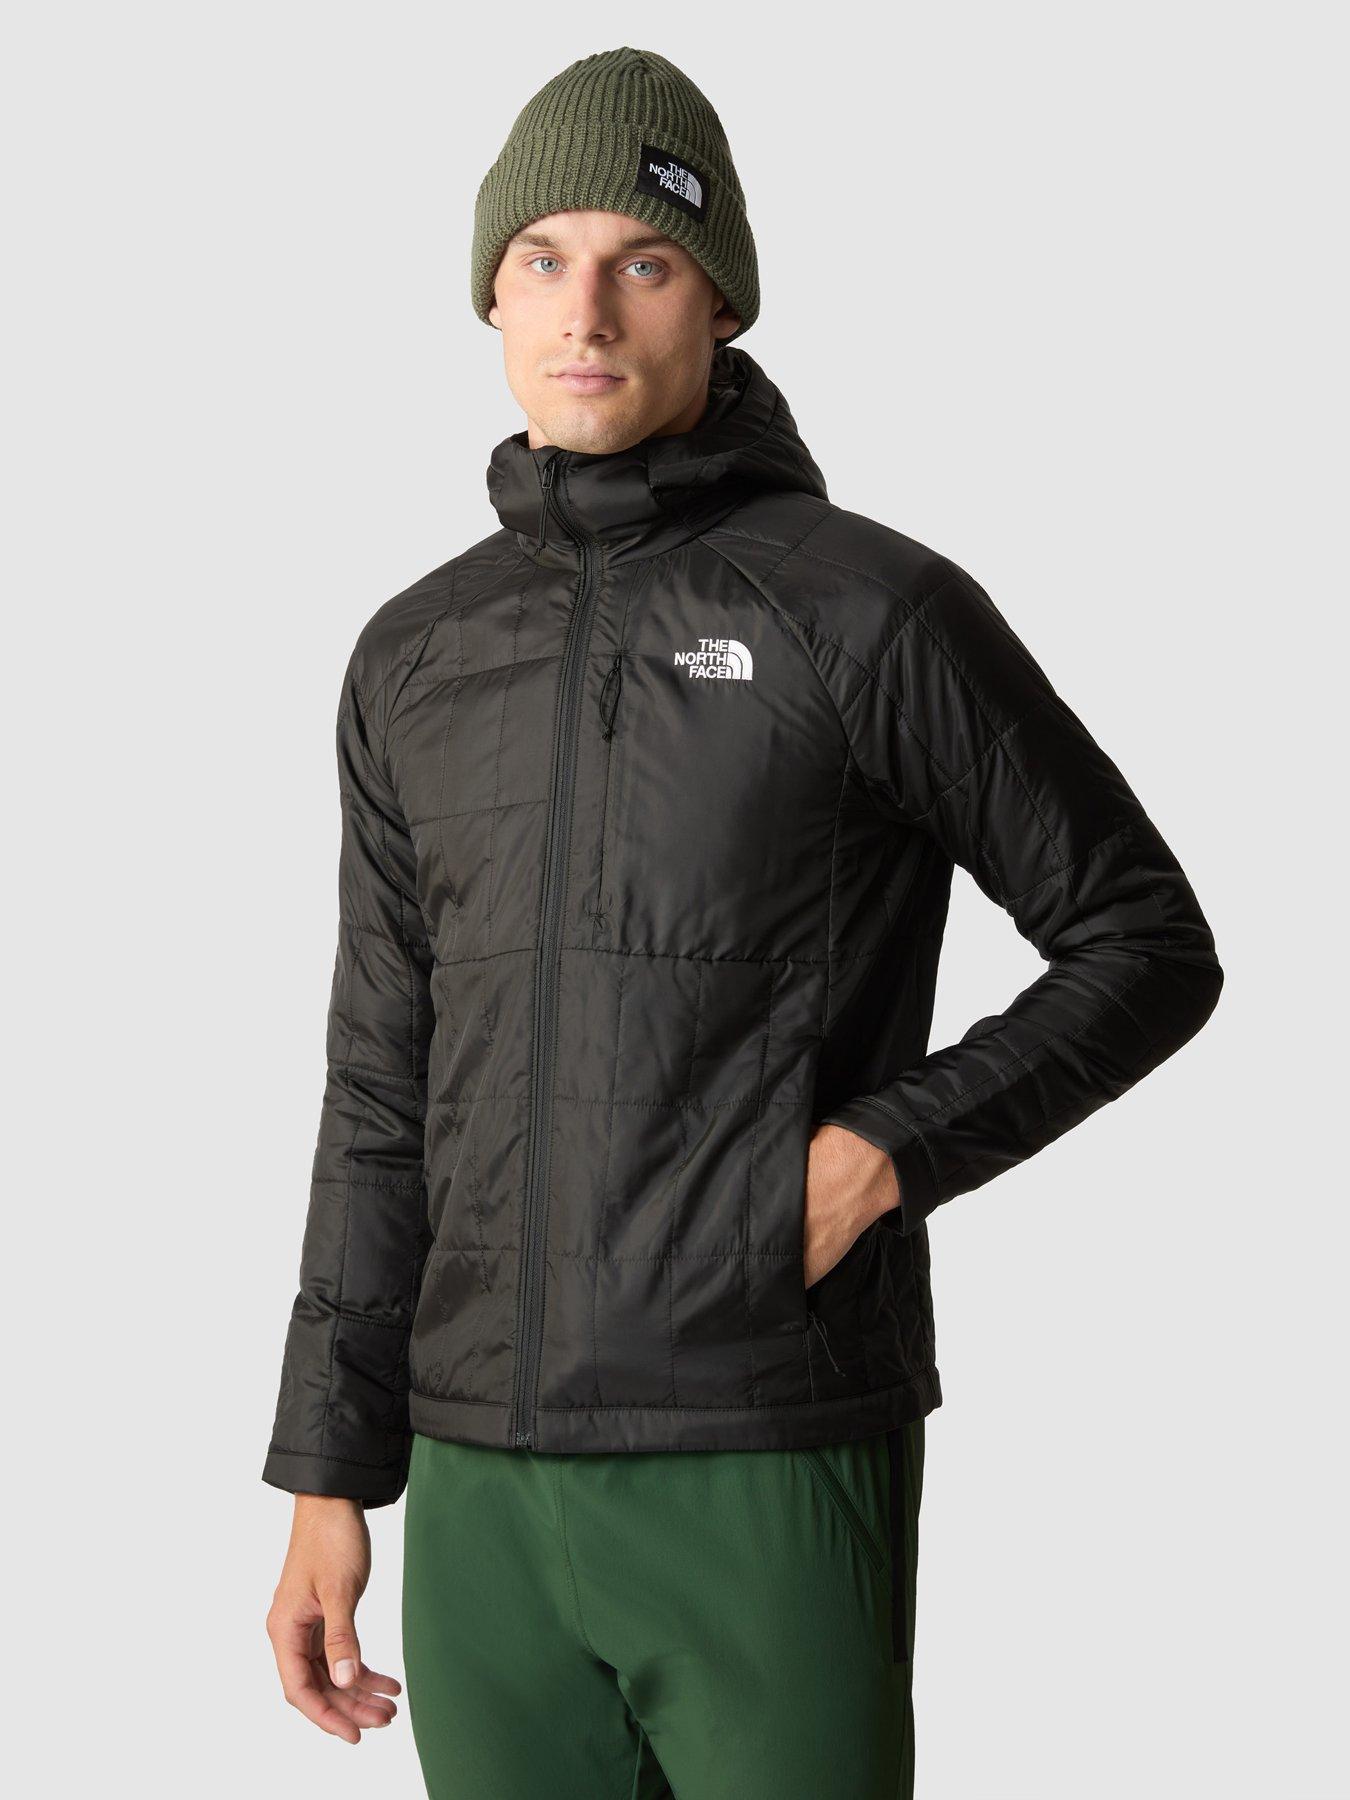 the north face flashdry green hoodieThe North Face Training Lab